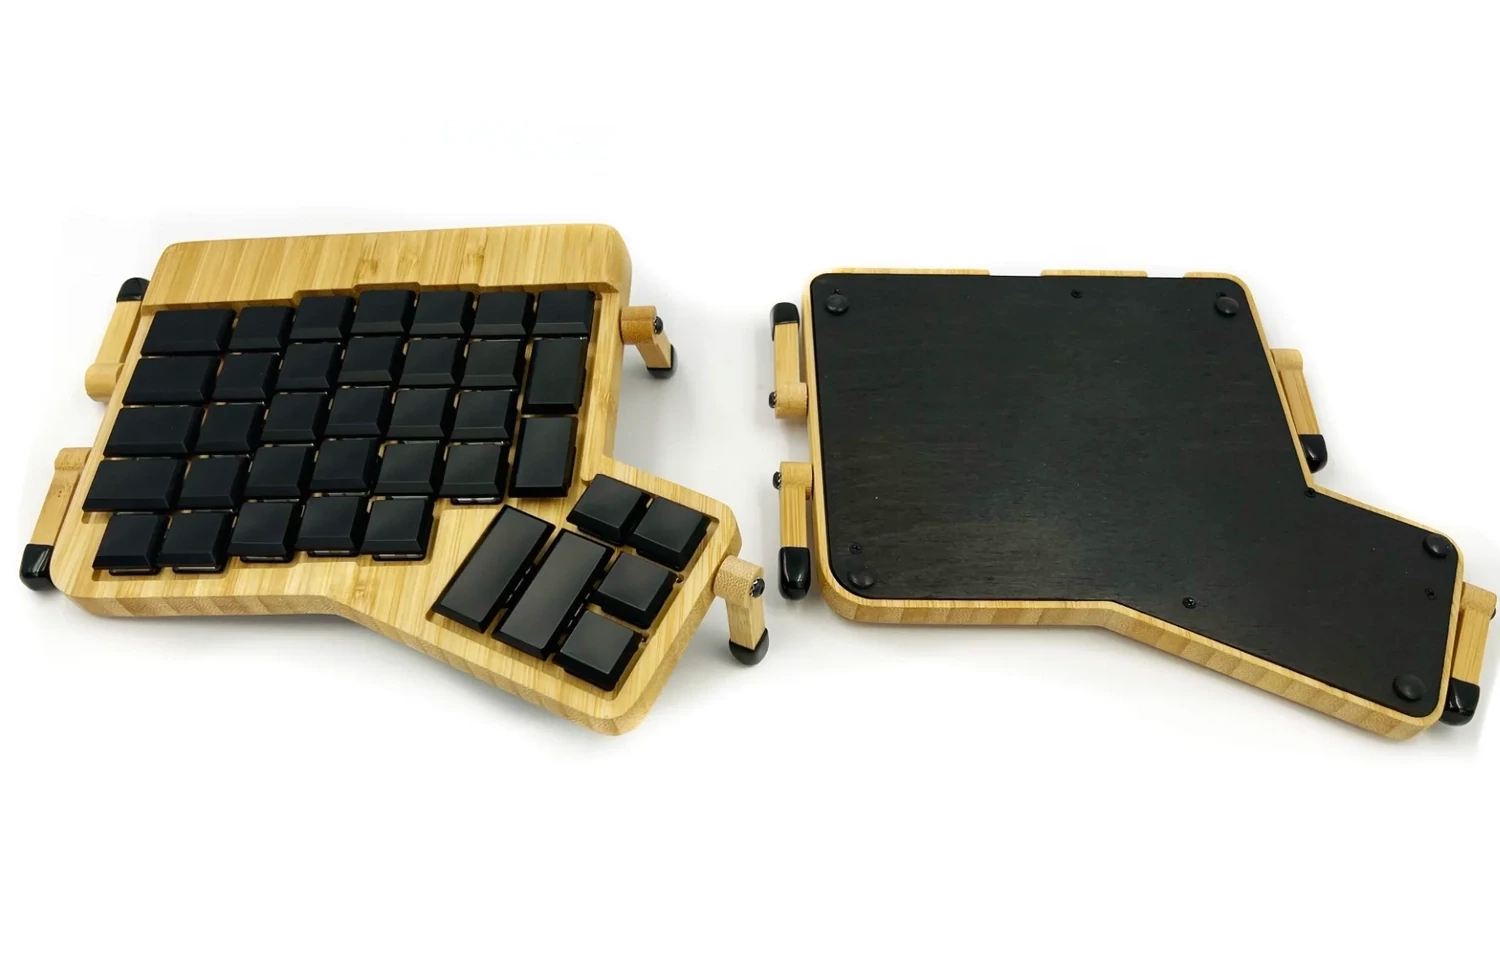 Pre-soldered ErgoDox_FT Low Profile Gaming Version (One Hand)